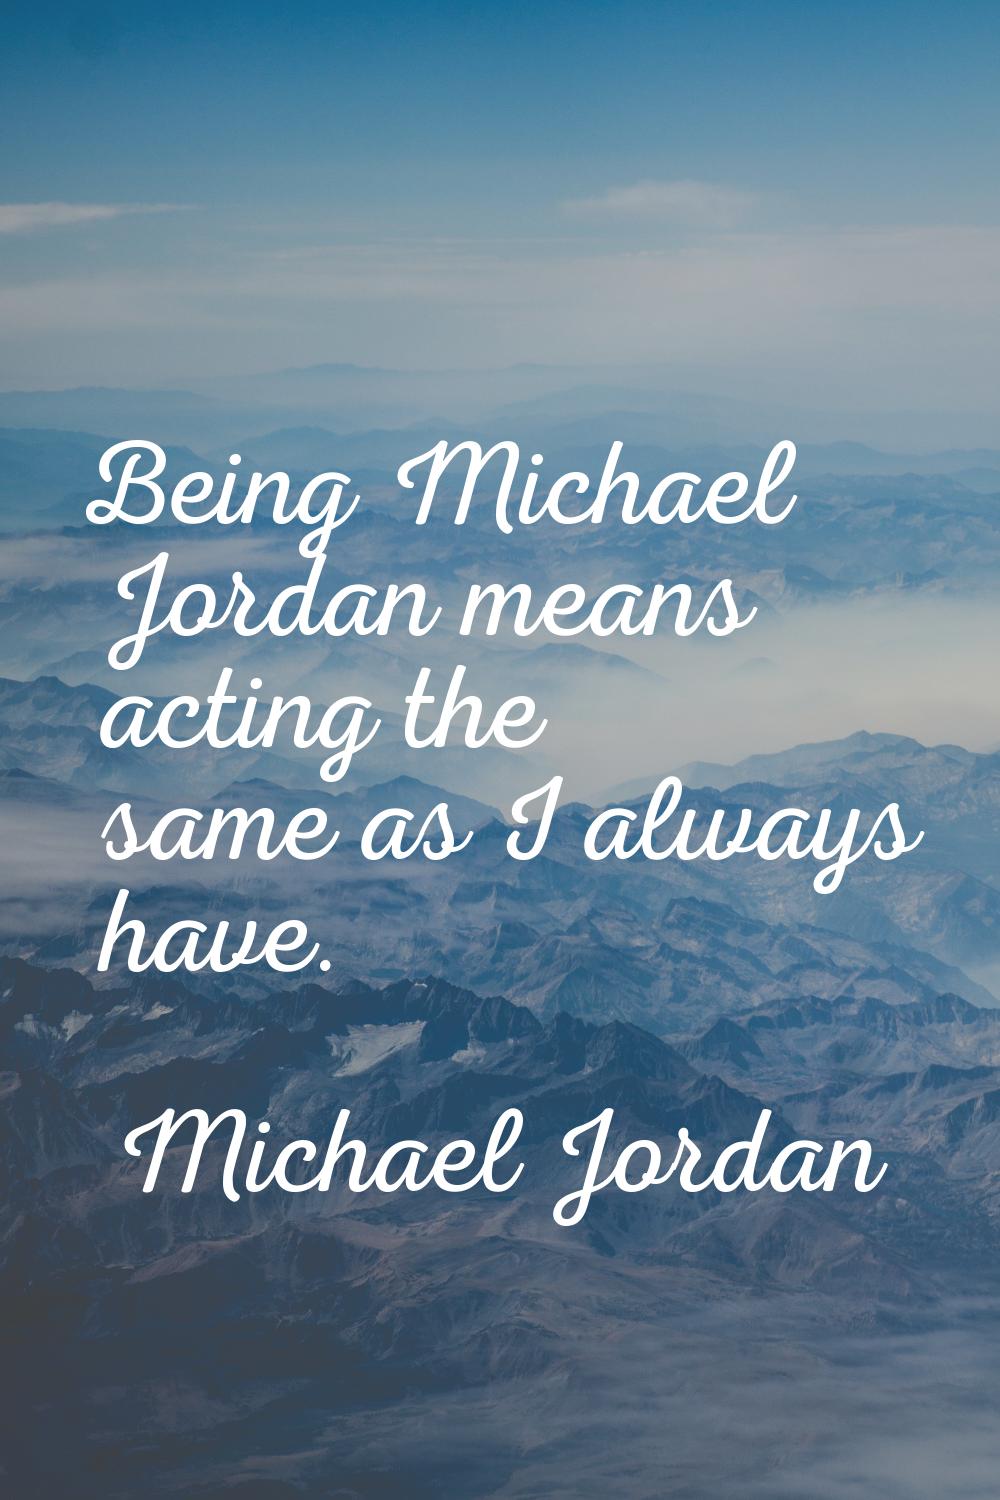 Being Michael Jordan means acting the same as I always have.